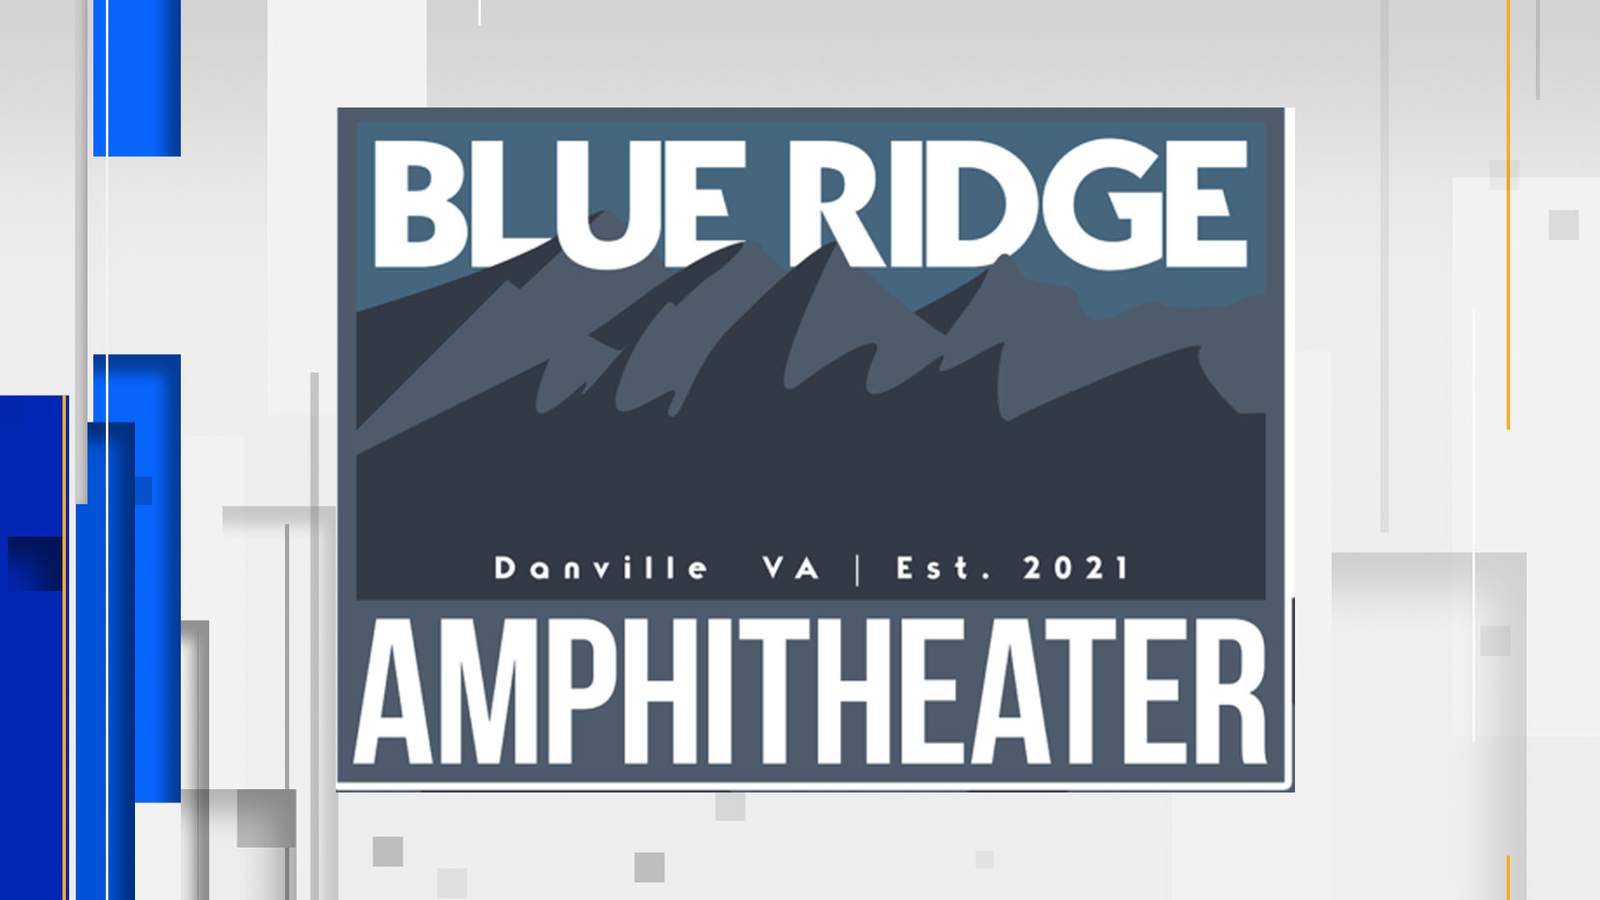 Large amphitheater set to open in Danville in August